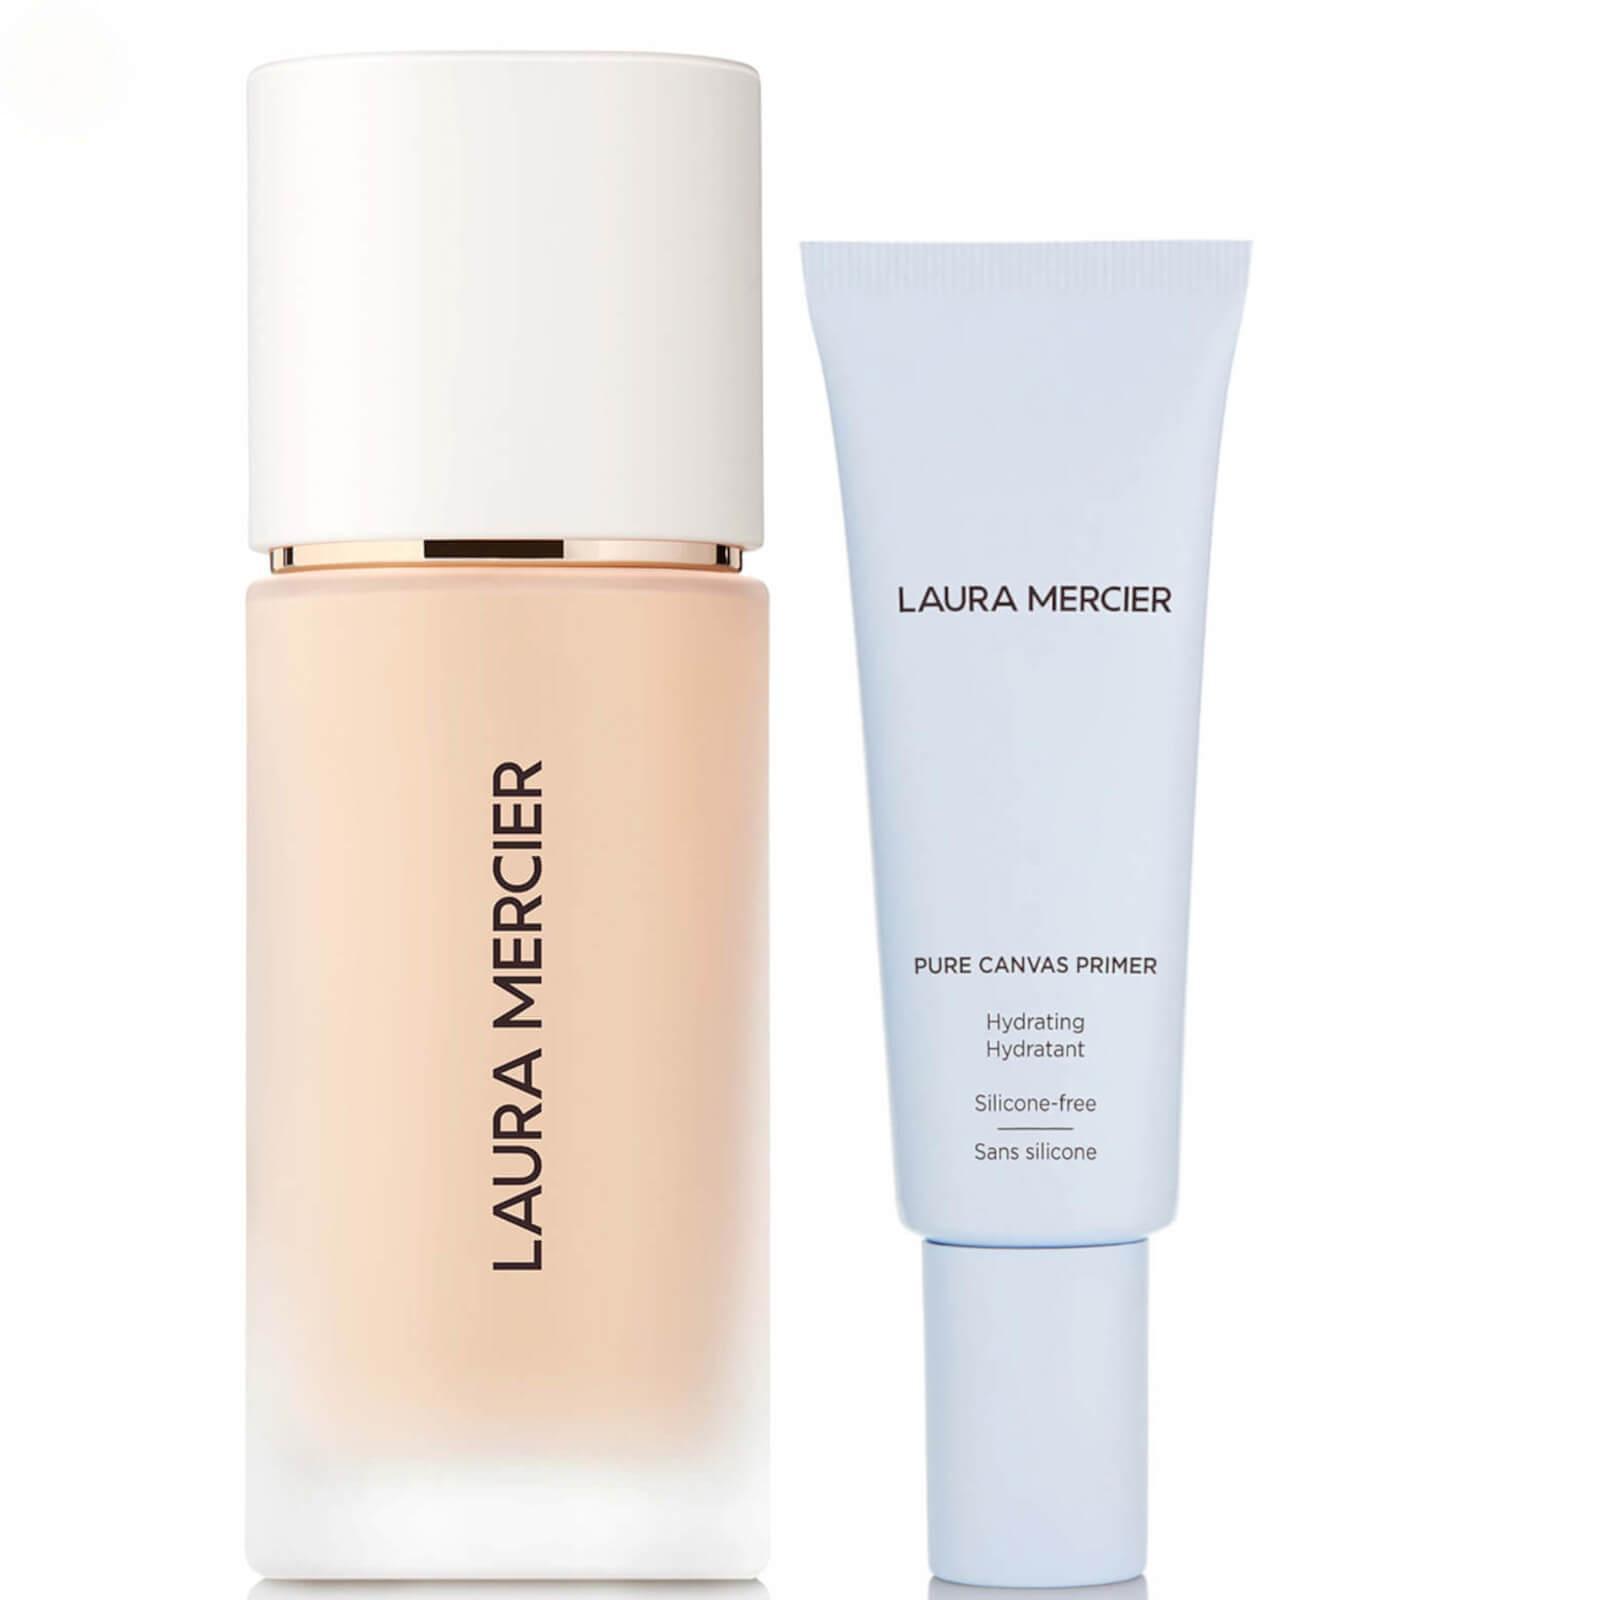 Laura Mercier Real Flawless Foundation and Pure Canvas Hydrating Primer Bundle (Various Shades) - 0N1 Silk